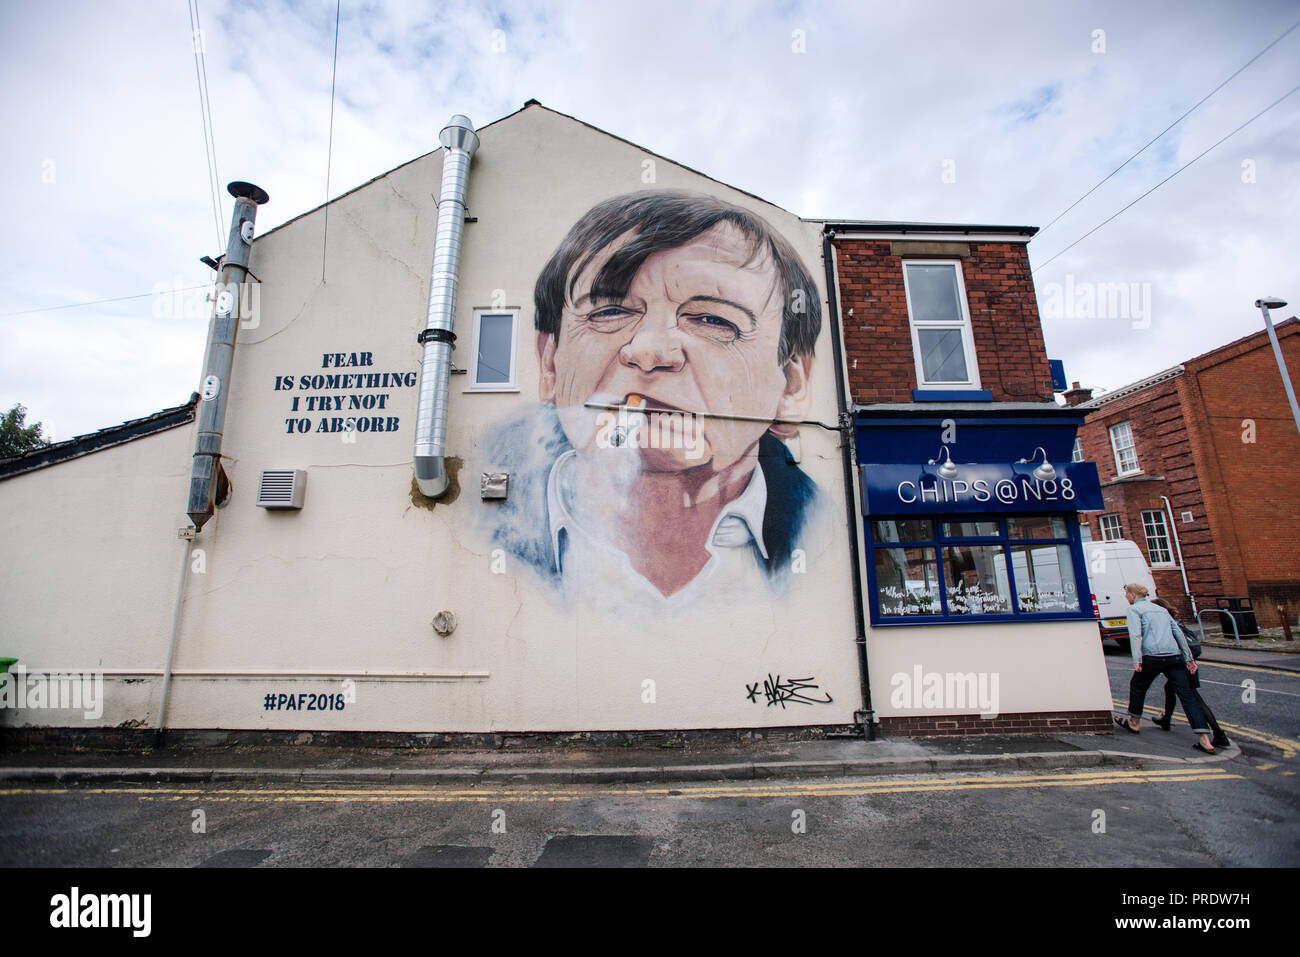 Prestwich, UK. 1st Oct 2018. Graffiti artist Akse p19 completes his portrait of 'The Fall' frontman Mark E.Smith on the side of a Manchester chip shop. 'The Fall' singer, who died in January 2018, is being commemorated in his hometown of Prestwich, Greater Manchester for an Arts Festival. Credit: Howard Harrison/Alamy Live News Stock Photo